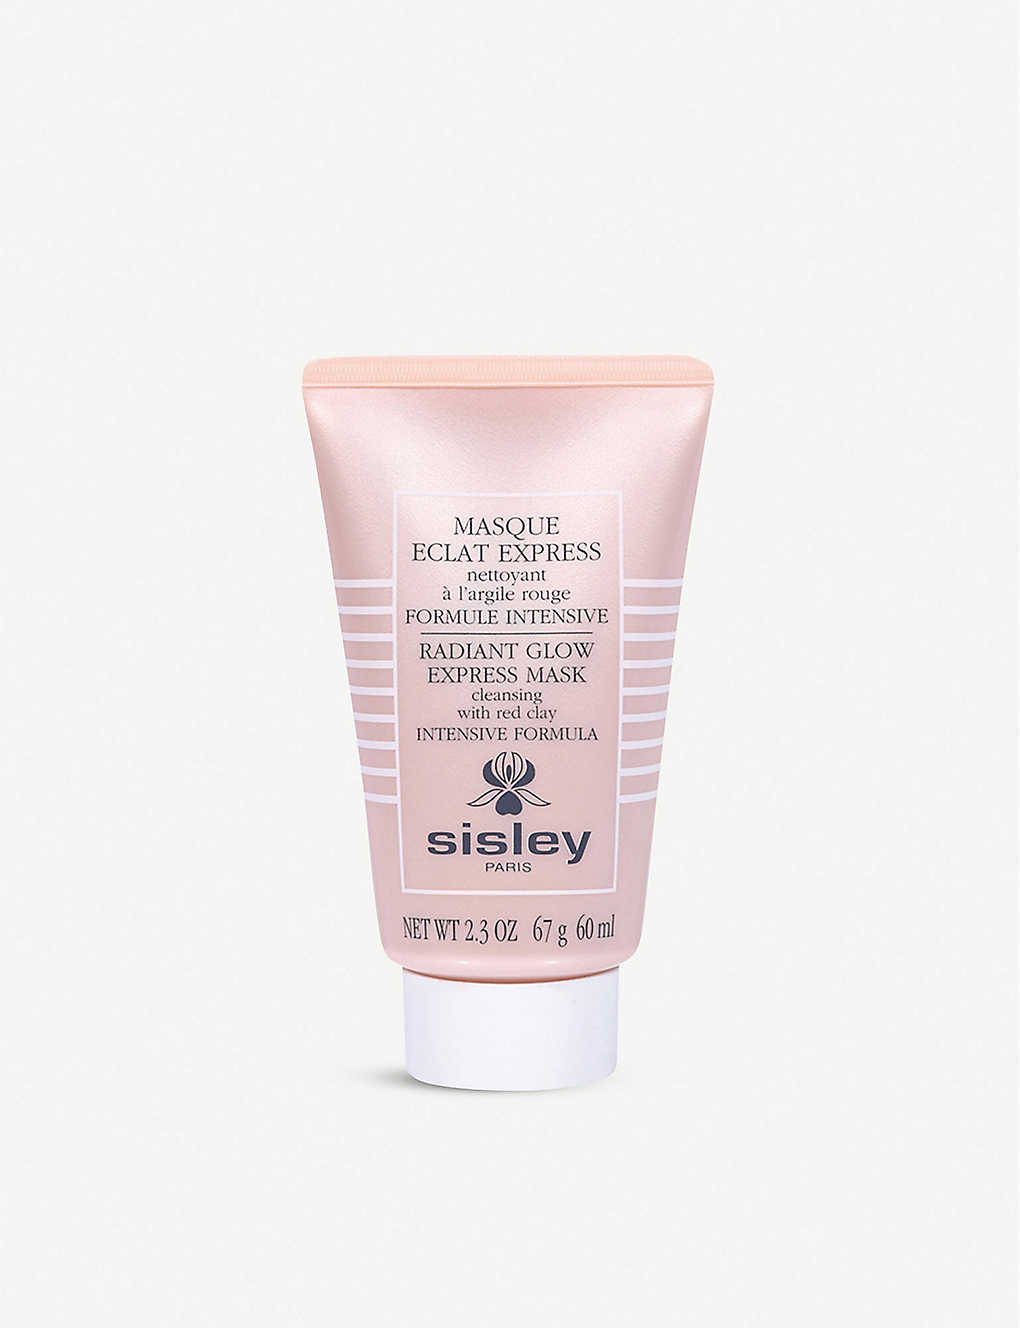 Sisley Paris Sisley Radiant Glow Express Mask – Cleansing With Red Clay Intensive Formula